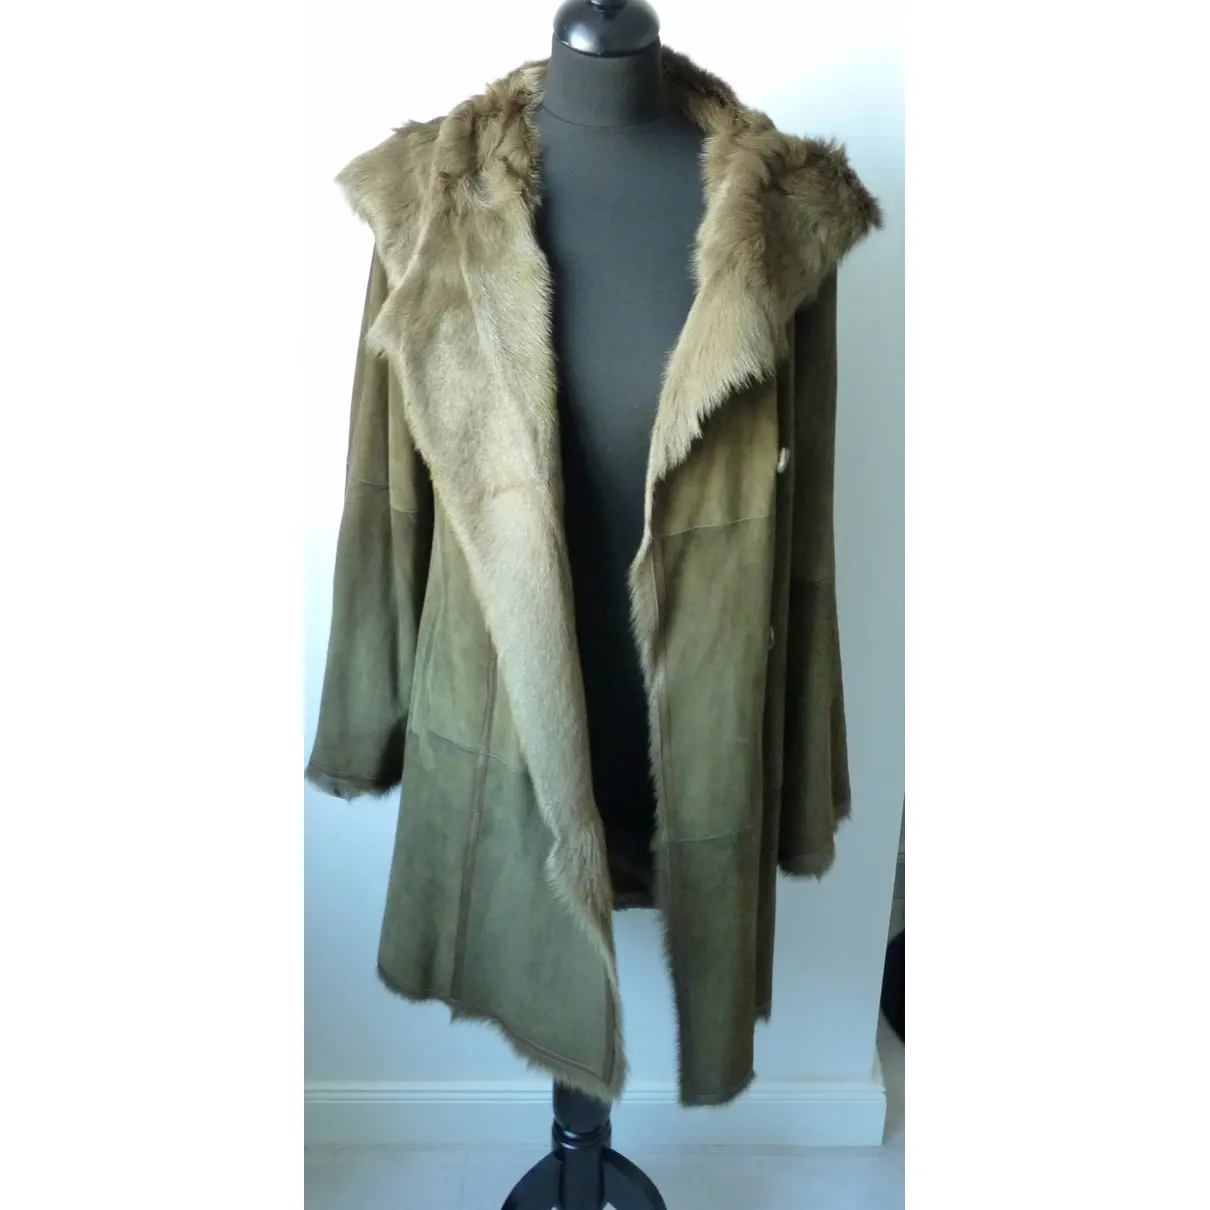 Leather coat Georges Rech